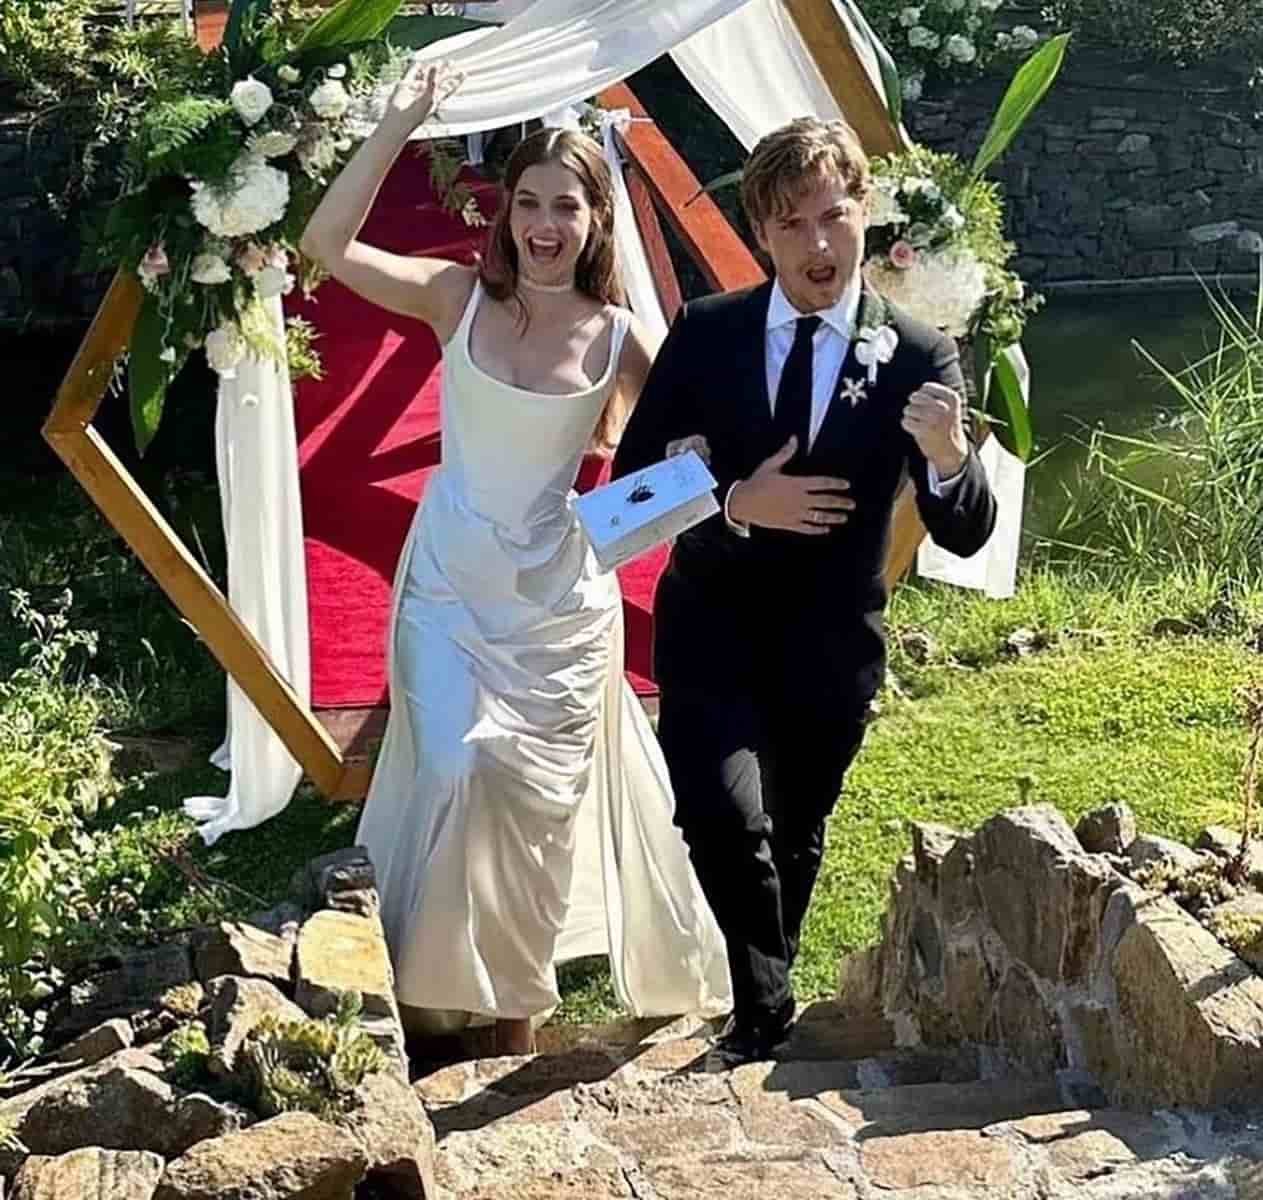 Boda Dylan Sprouse